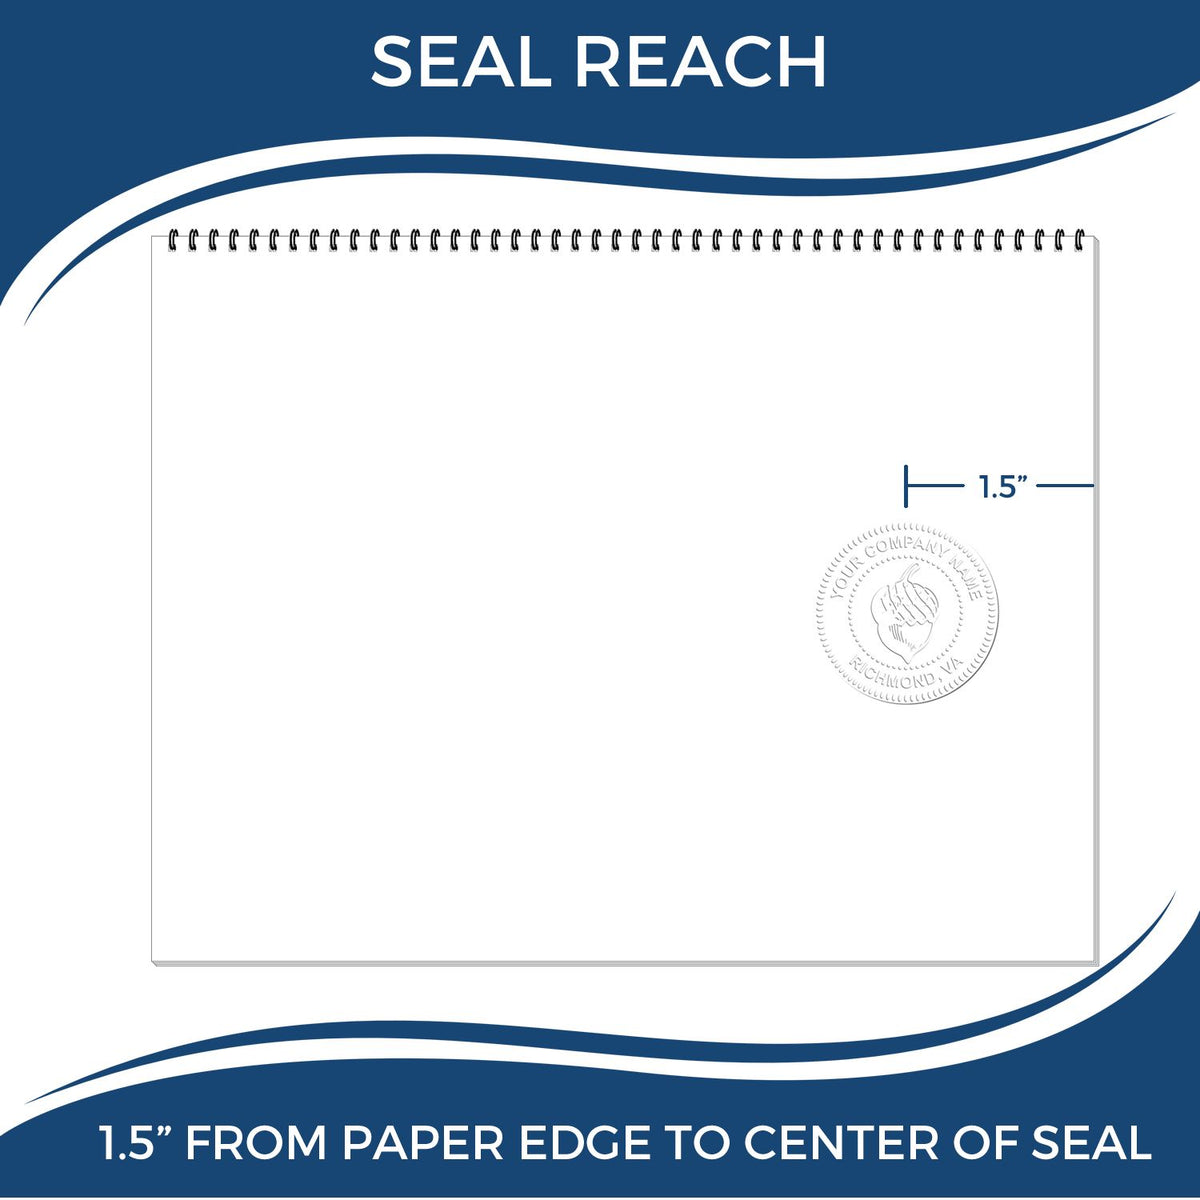 An infographic showing the seal reach which is represented by a ruler and a miniature seal image of the Soft Florida Professional Geologist Seal